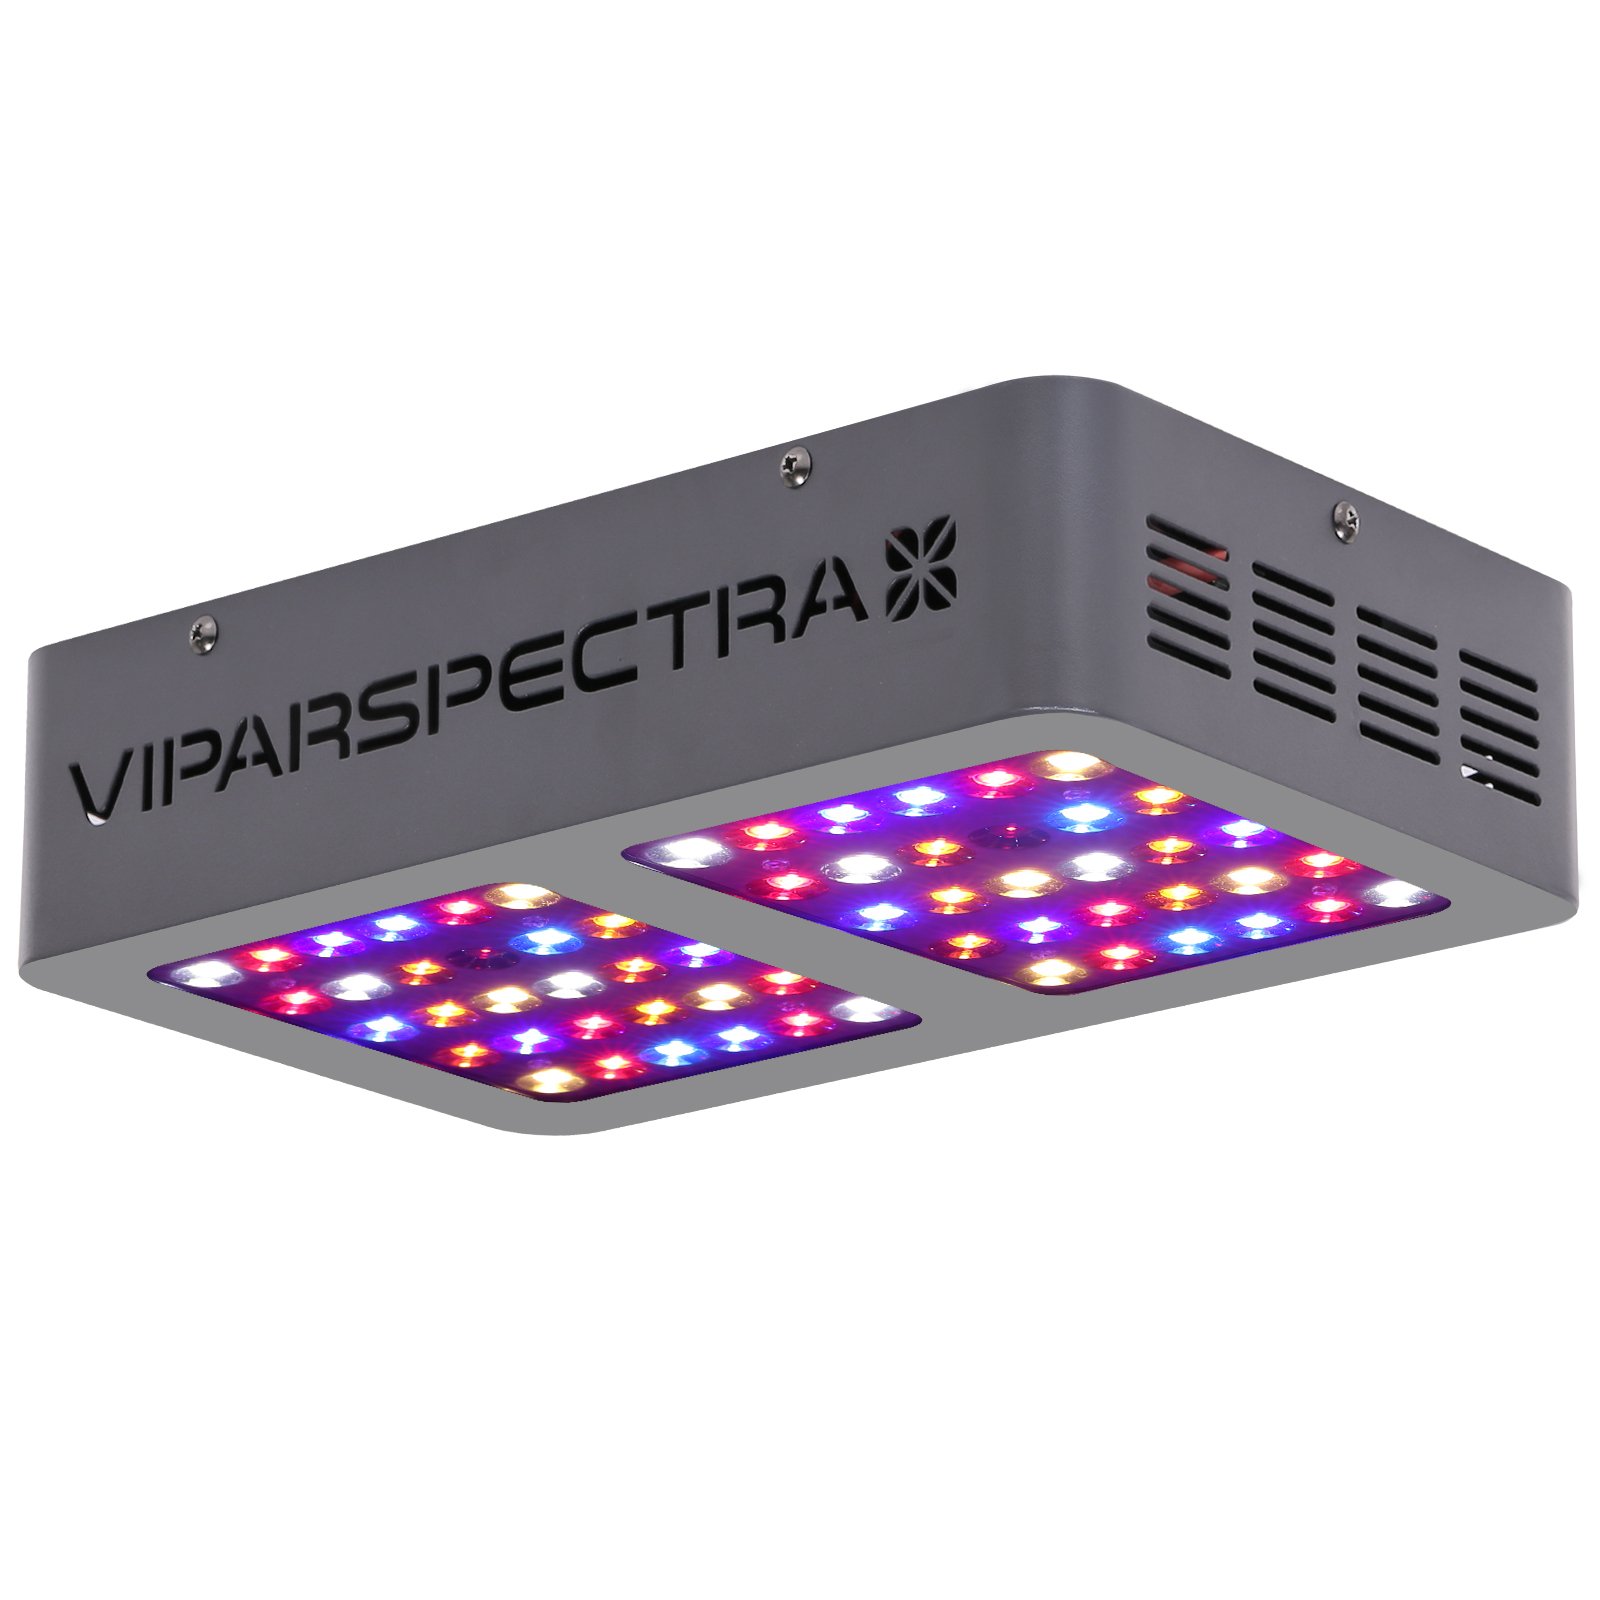 "Viparspectra 450w led review